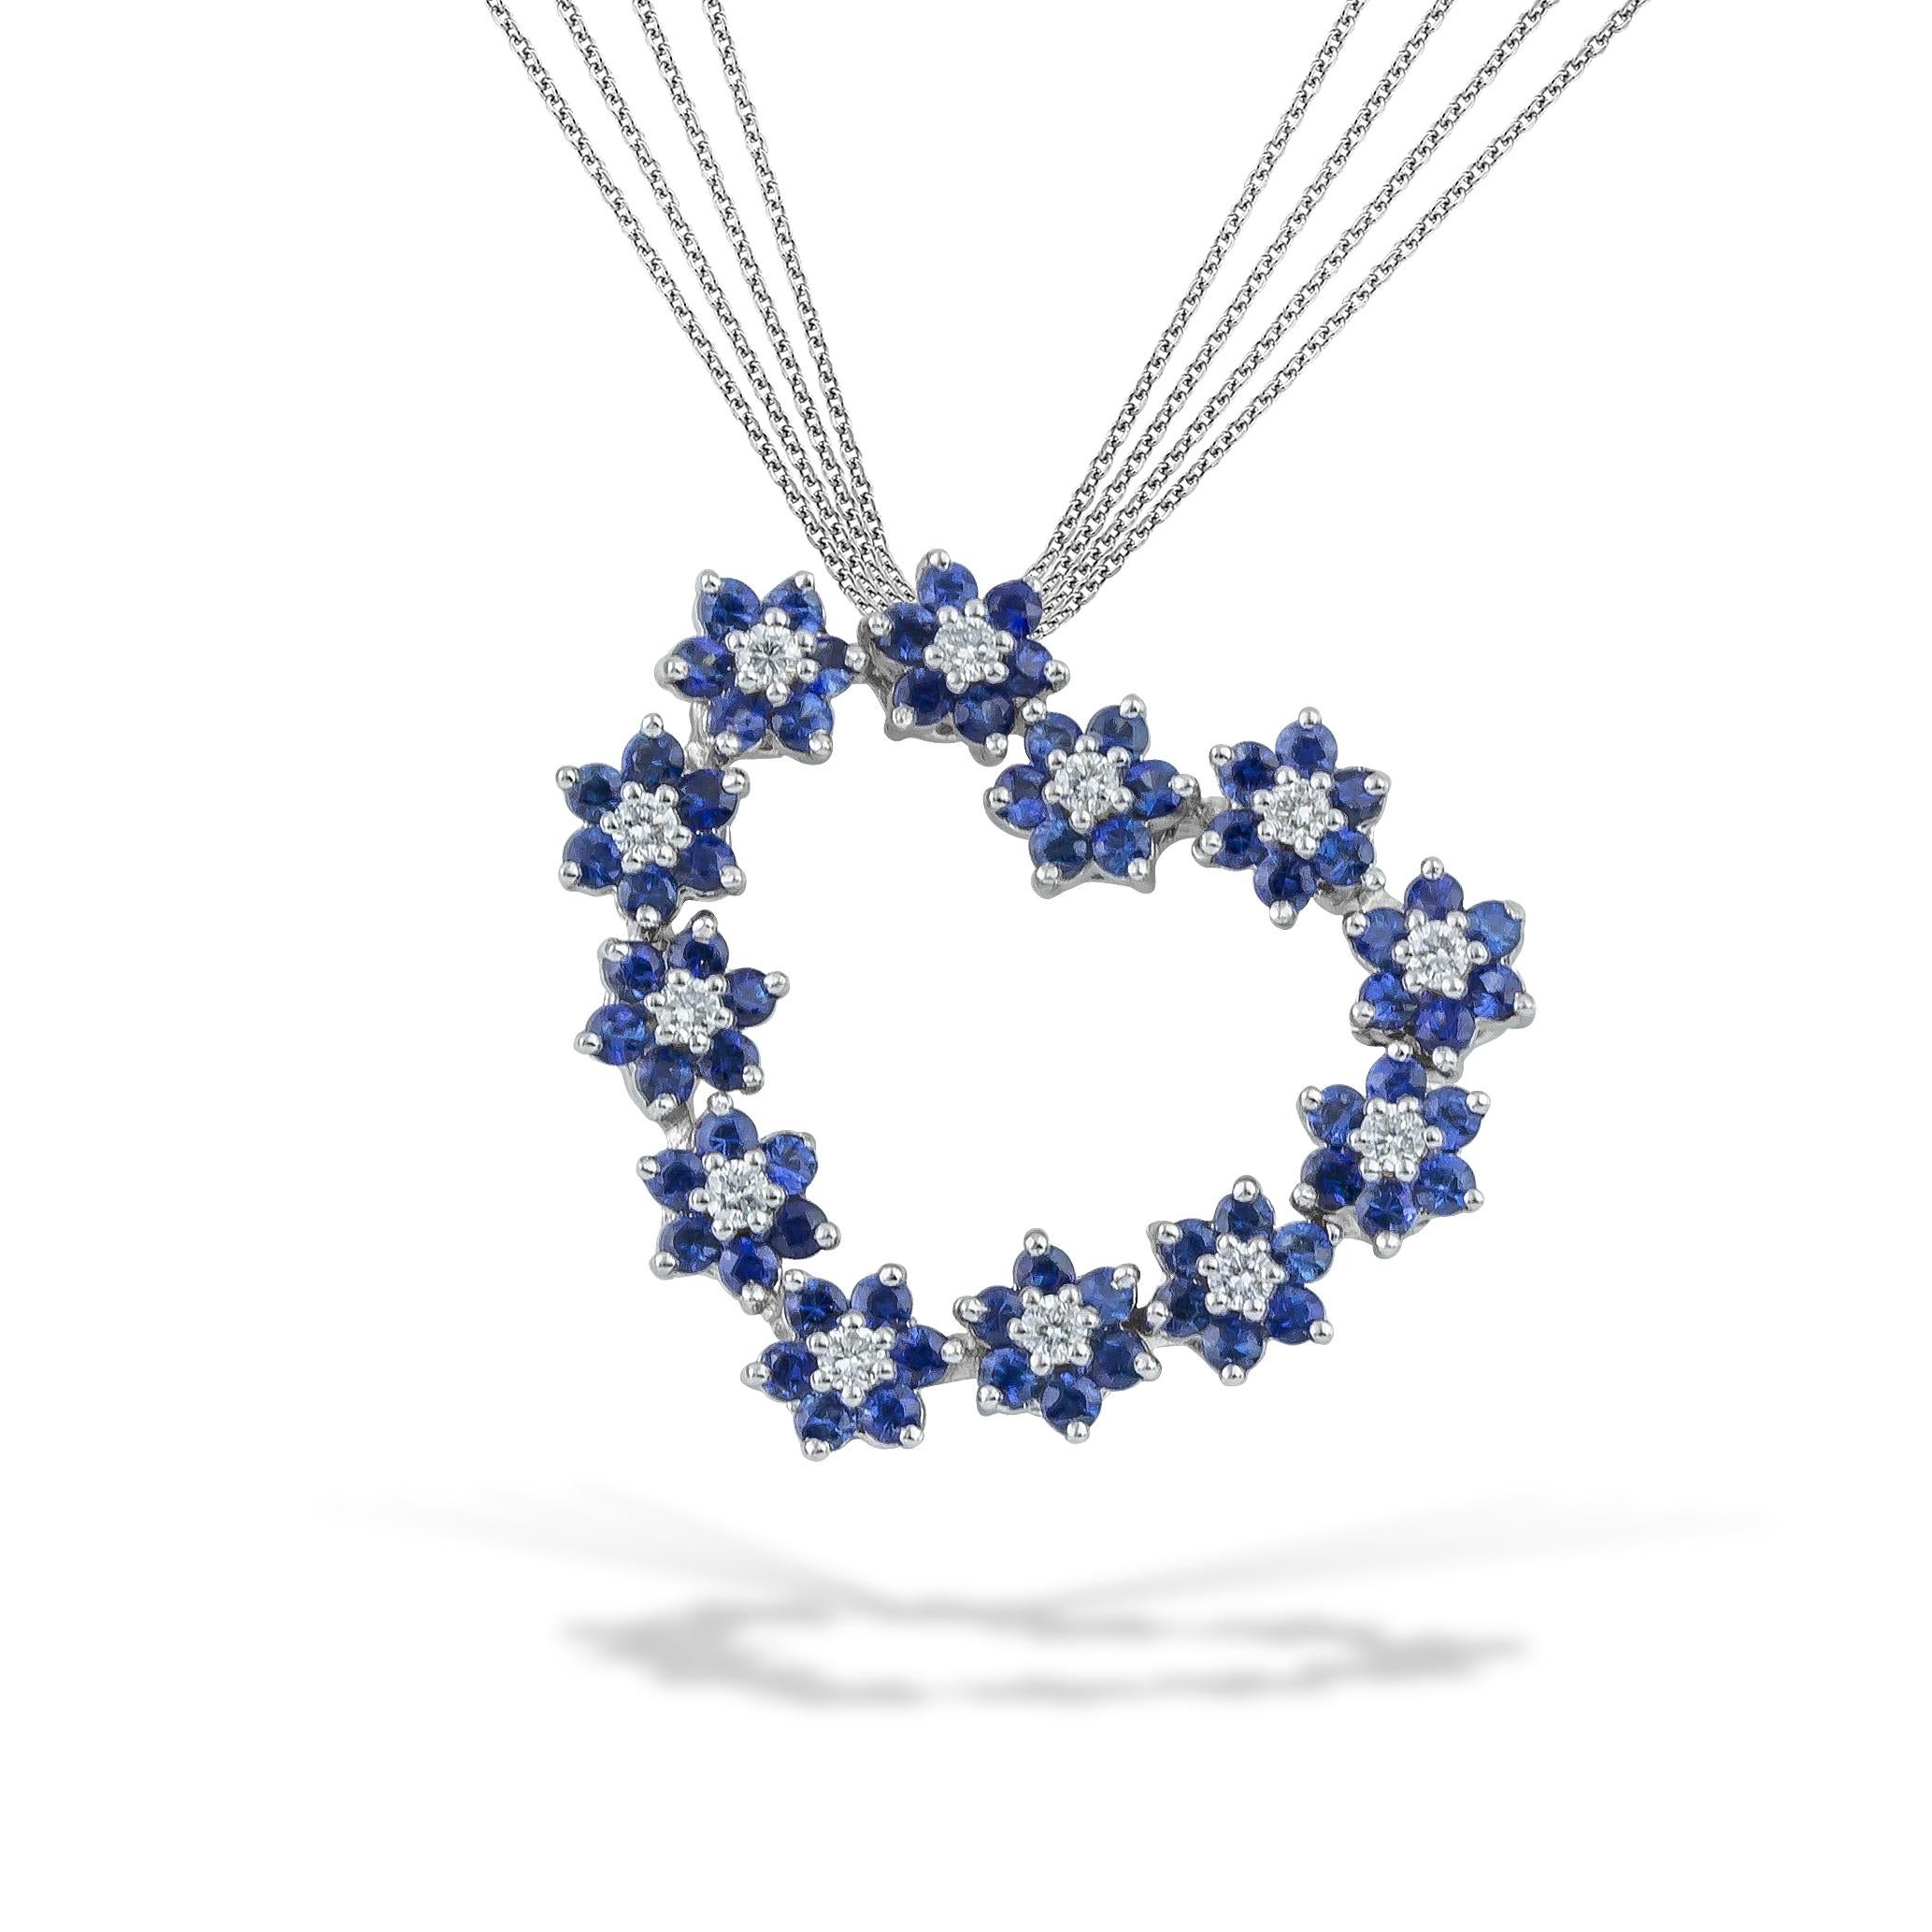 Heart Pendant Necklace with blue Sapphires Rosette and brilliant cut Diamonds. This romantic and easywear blue heart comes with Multi Chain ( x4 diamond cut rolo chain) in 18kt White Gold. This necklace belongs to 